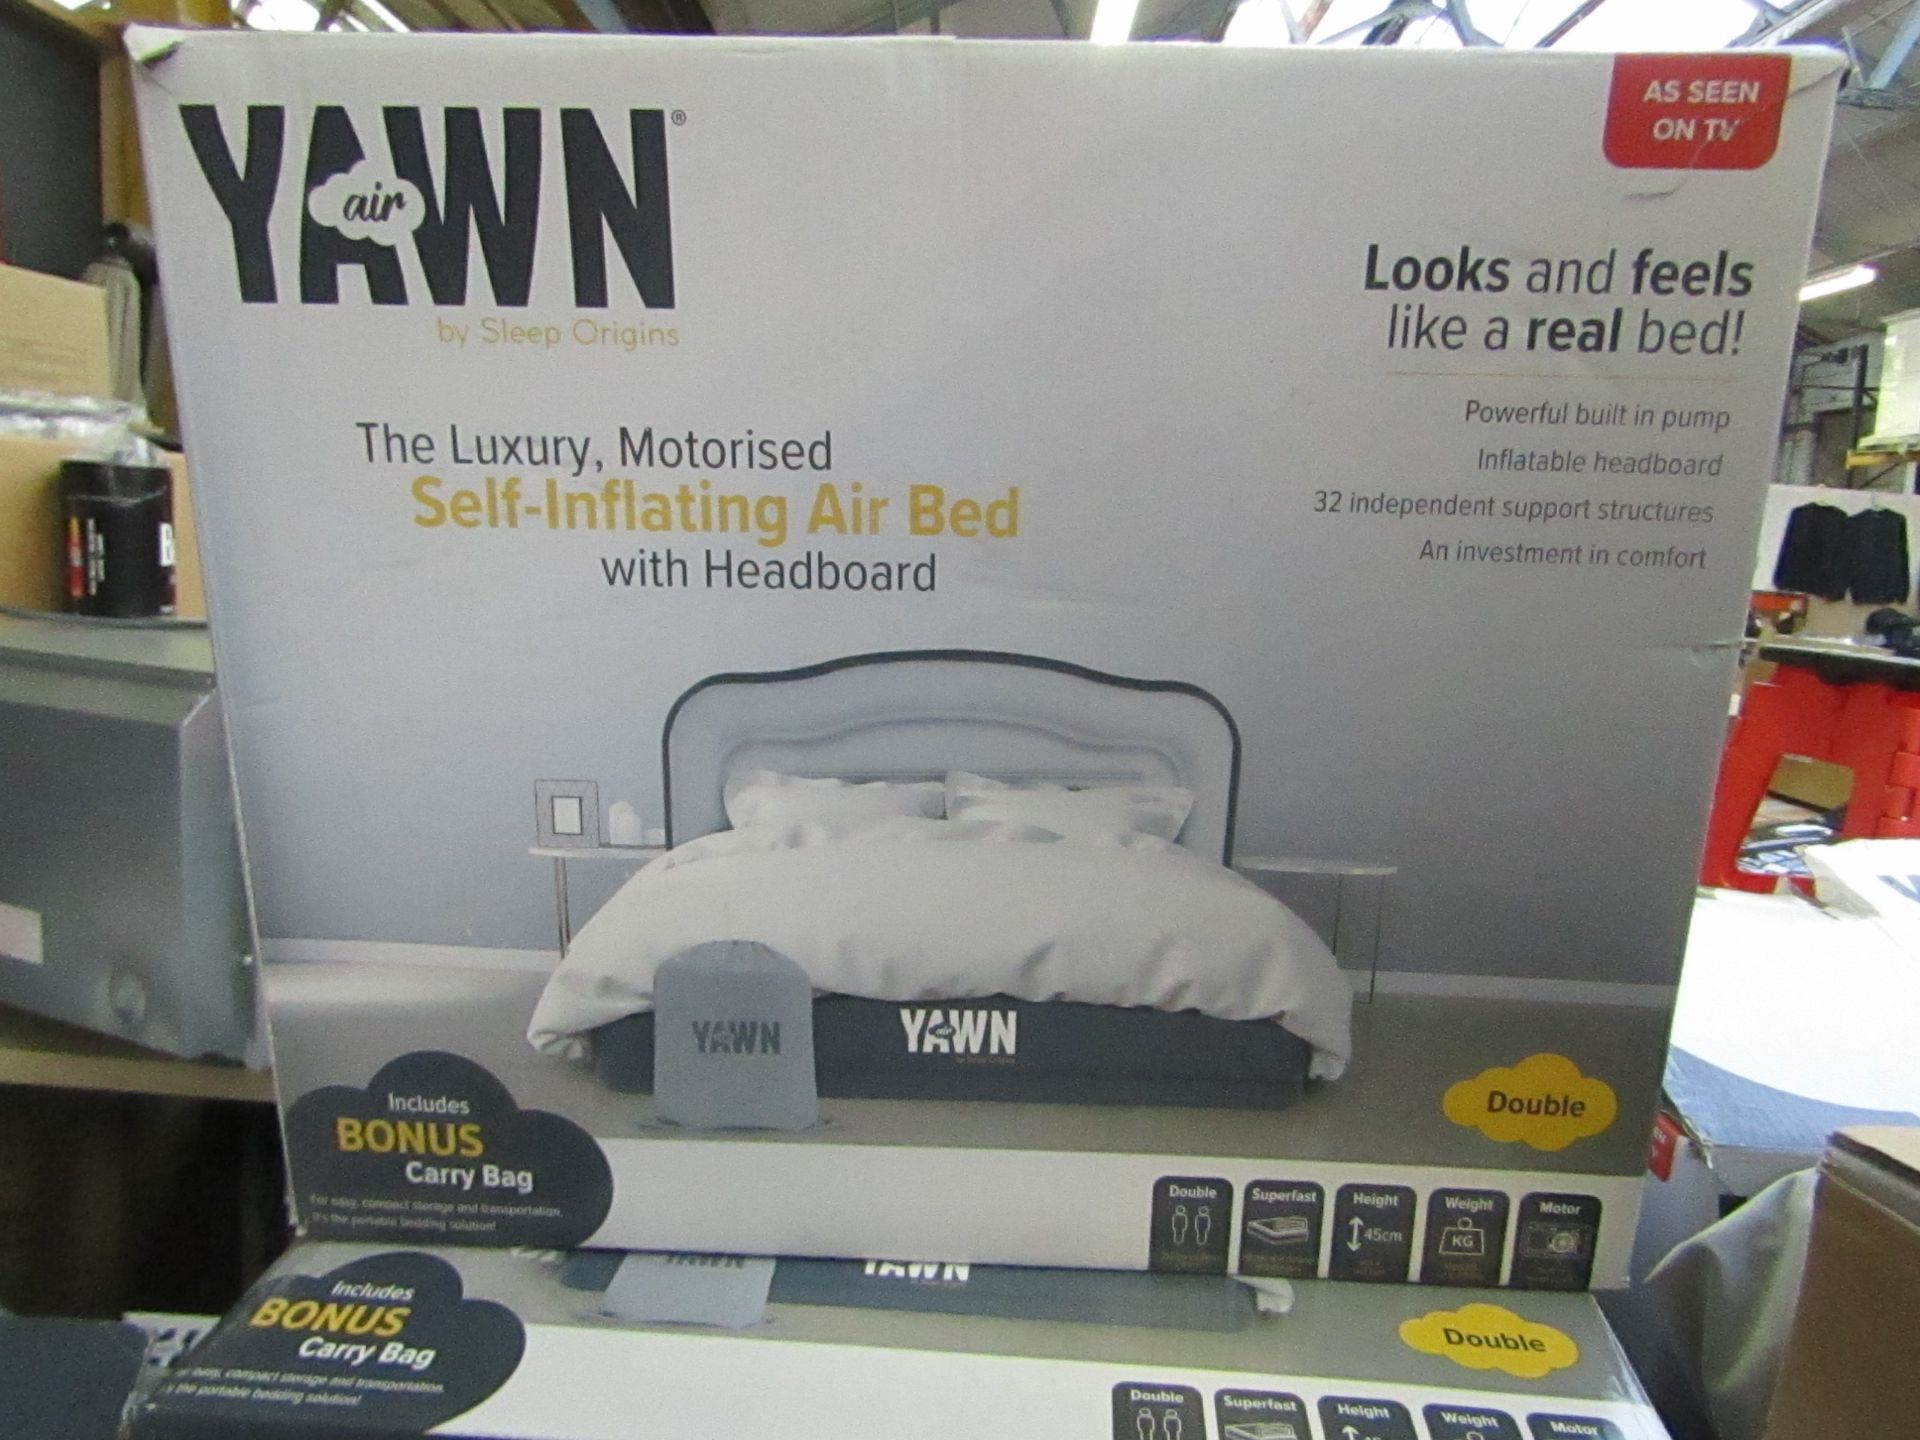 Yawn Double Air bed with built in Pump, boxed (box may be damaged), item is unchecked, RRP £69.99 at